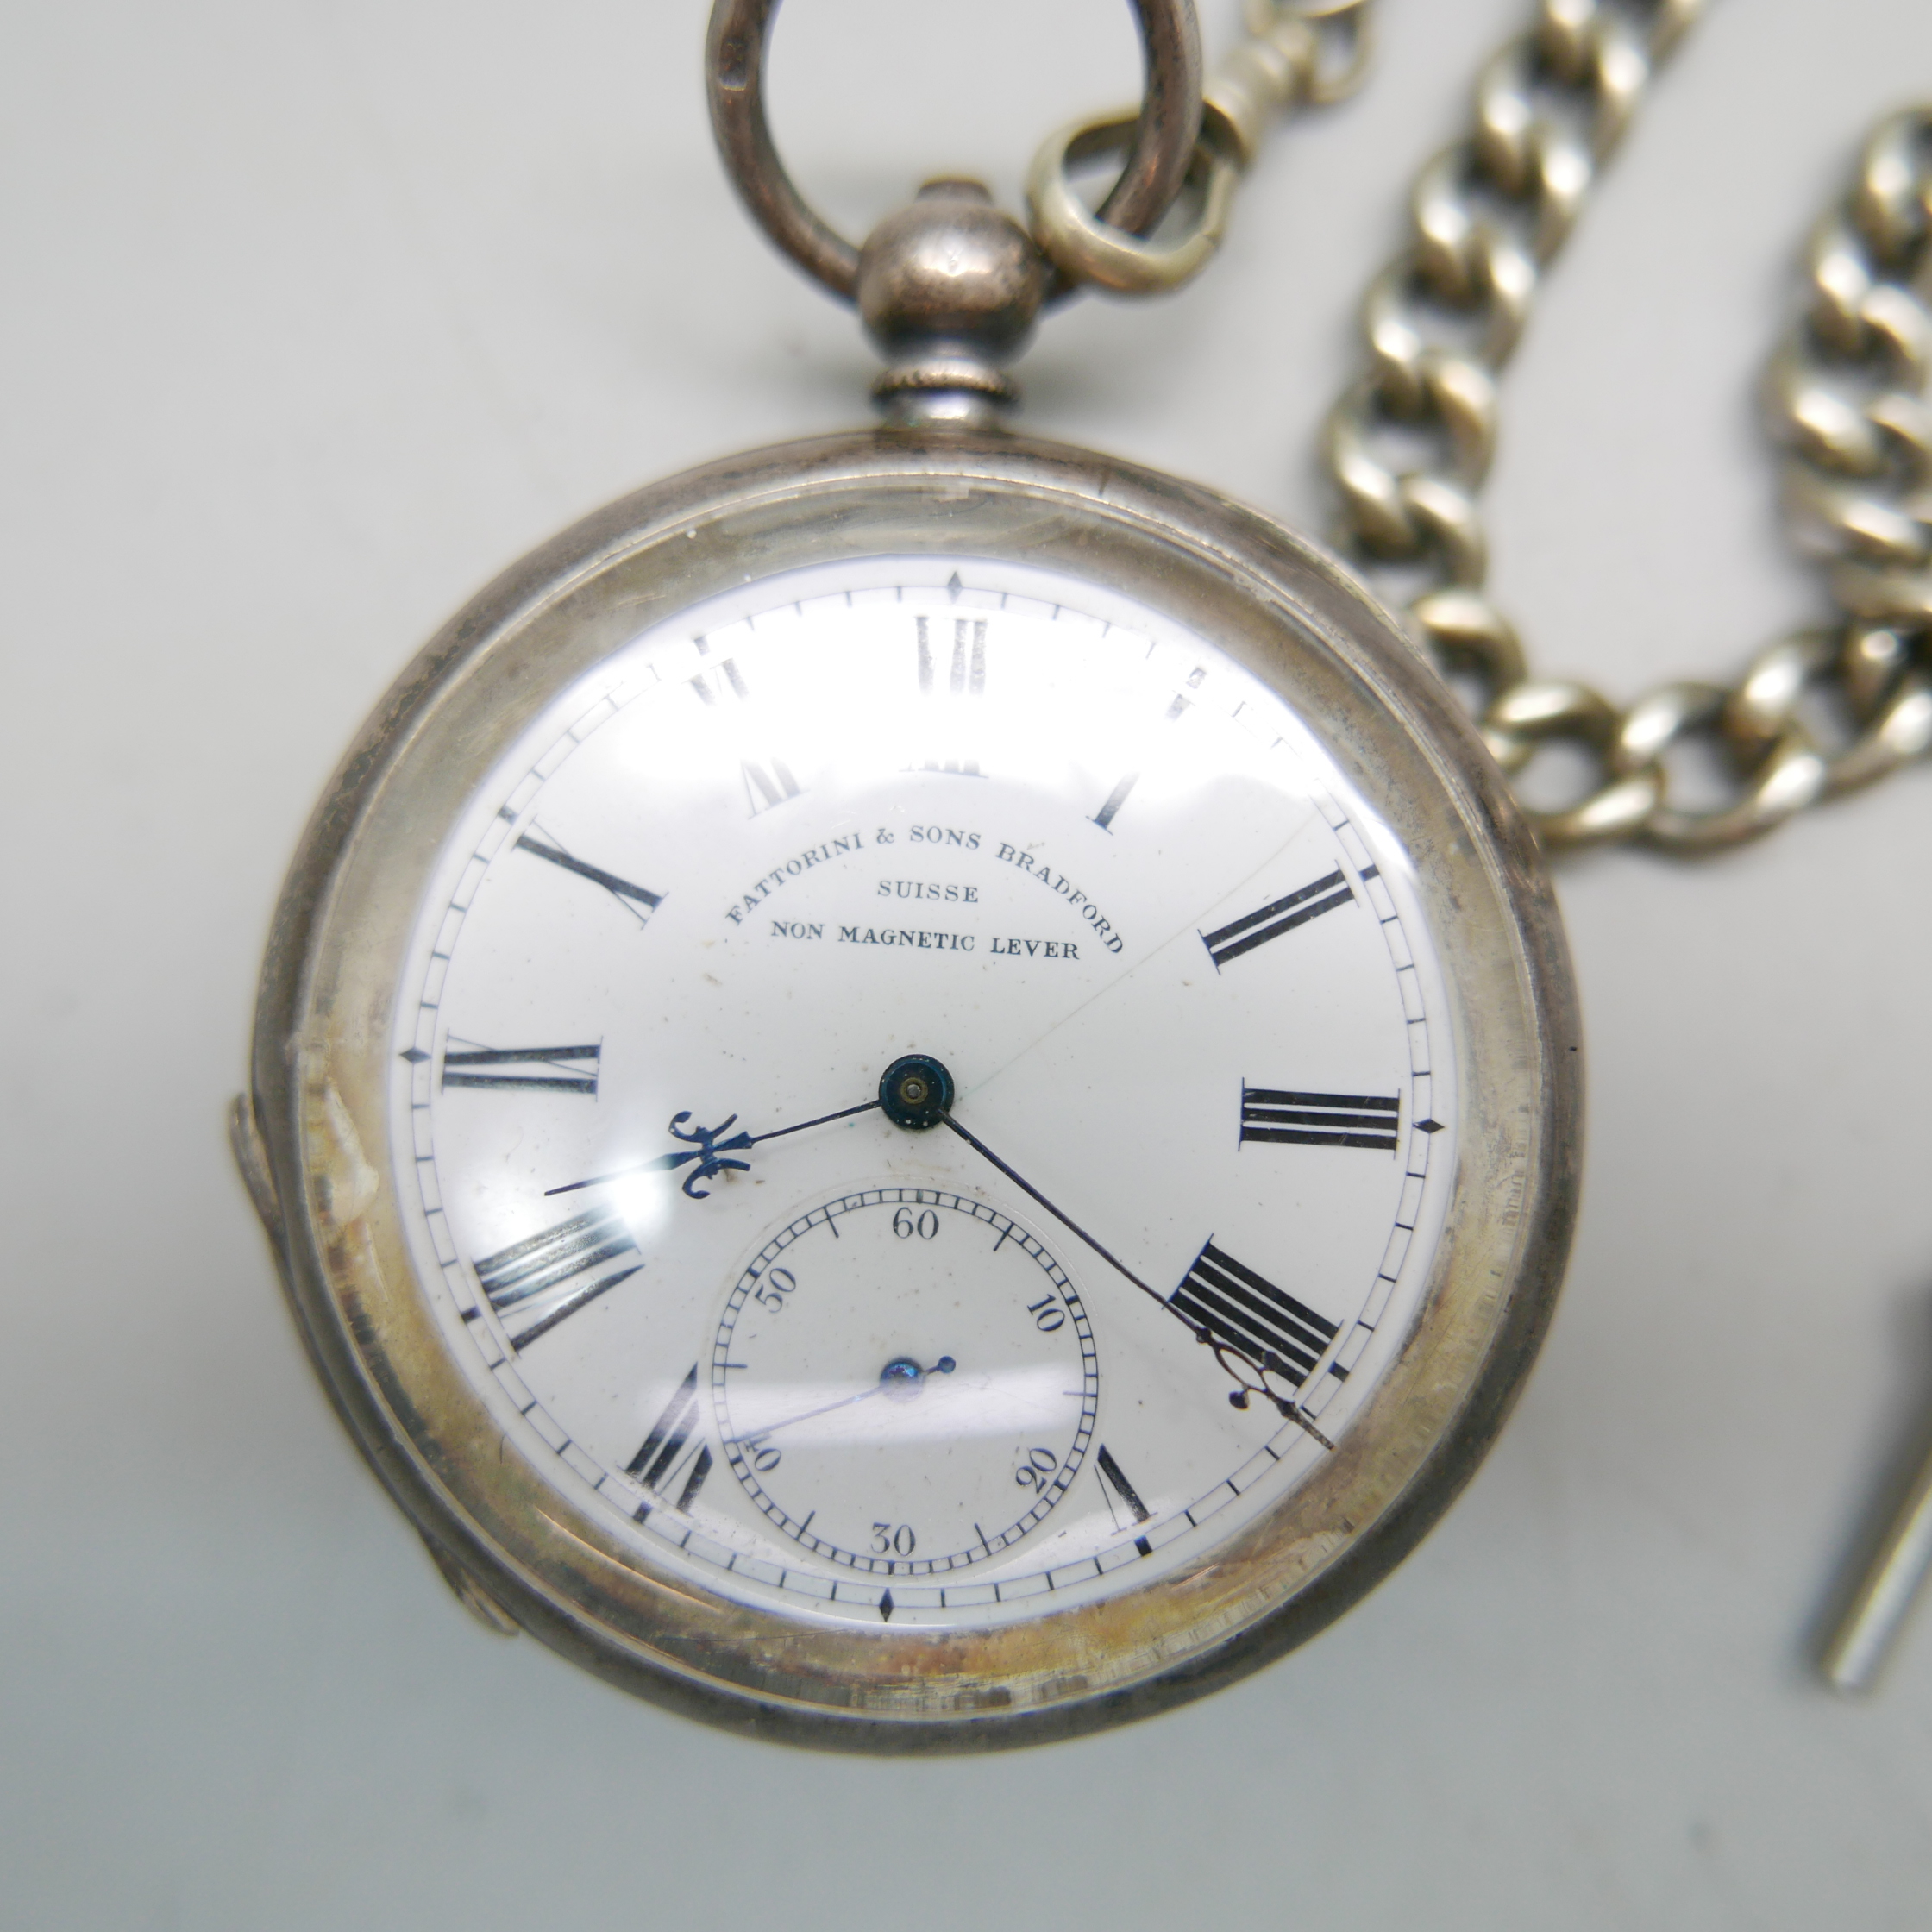 A silver cased pocket watch, Fattorini & Sons, Bradford, non magnetic lever movement with a - Image 2 of 5